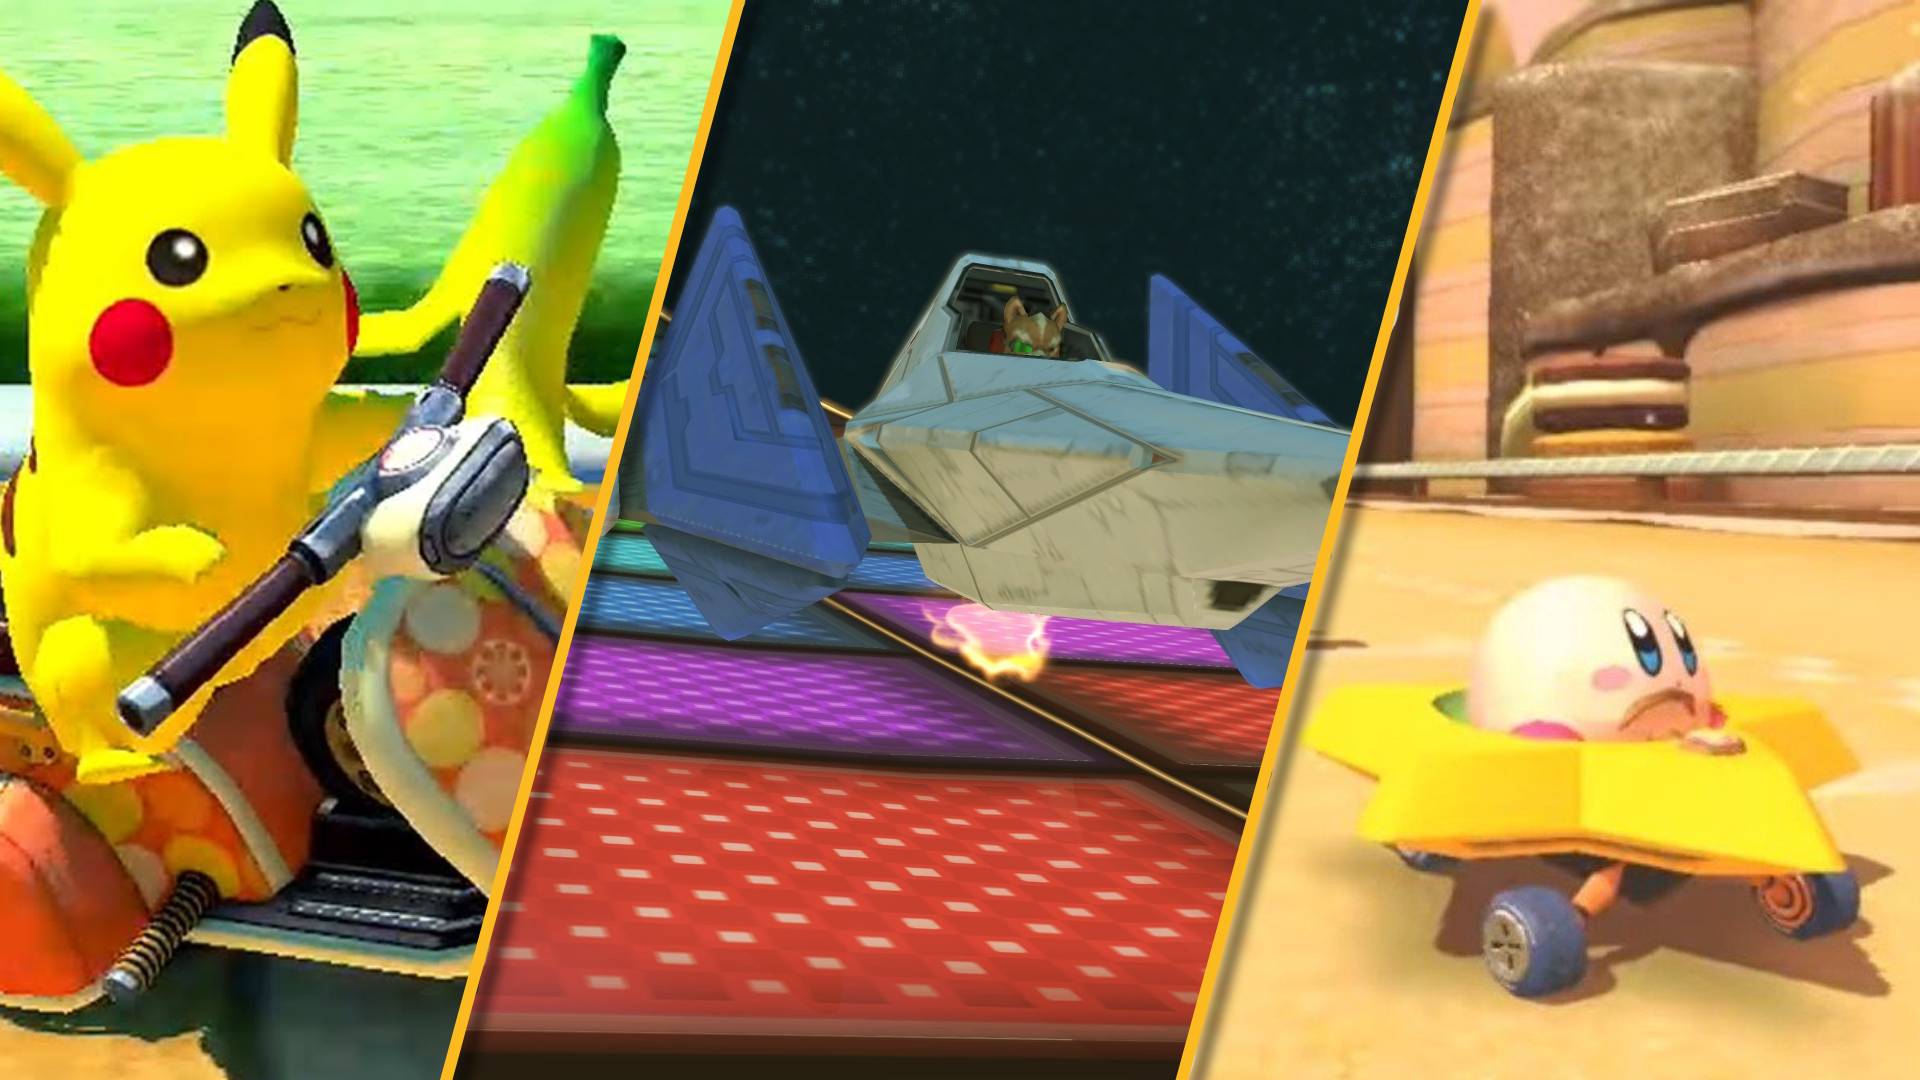 What Mario Kart 8 Deluxe's New DLC Tells Us About the Release Date of Mario  Kart 9